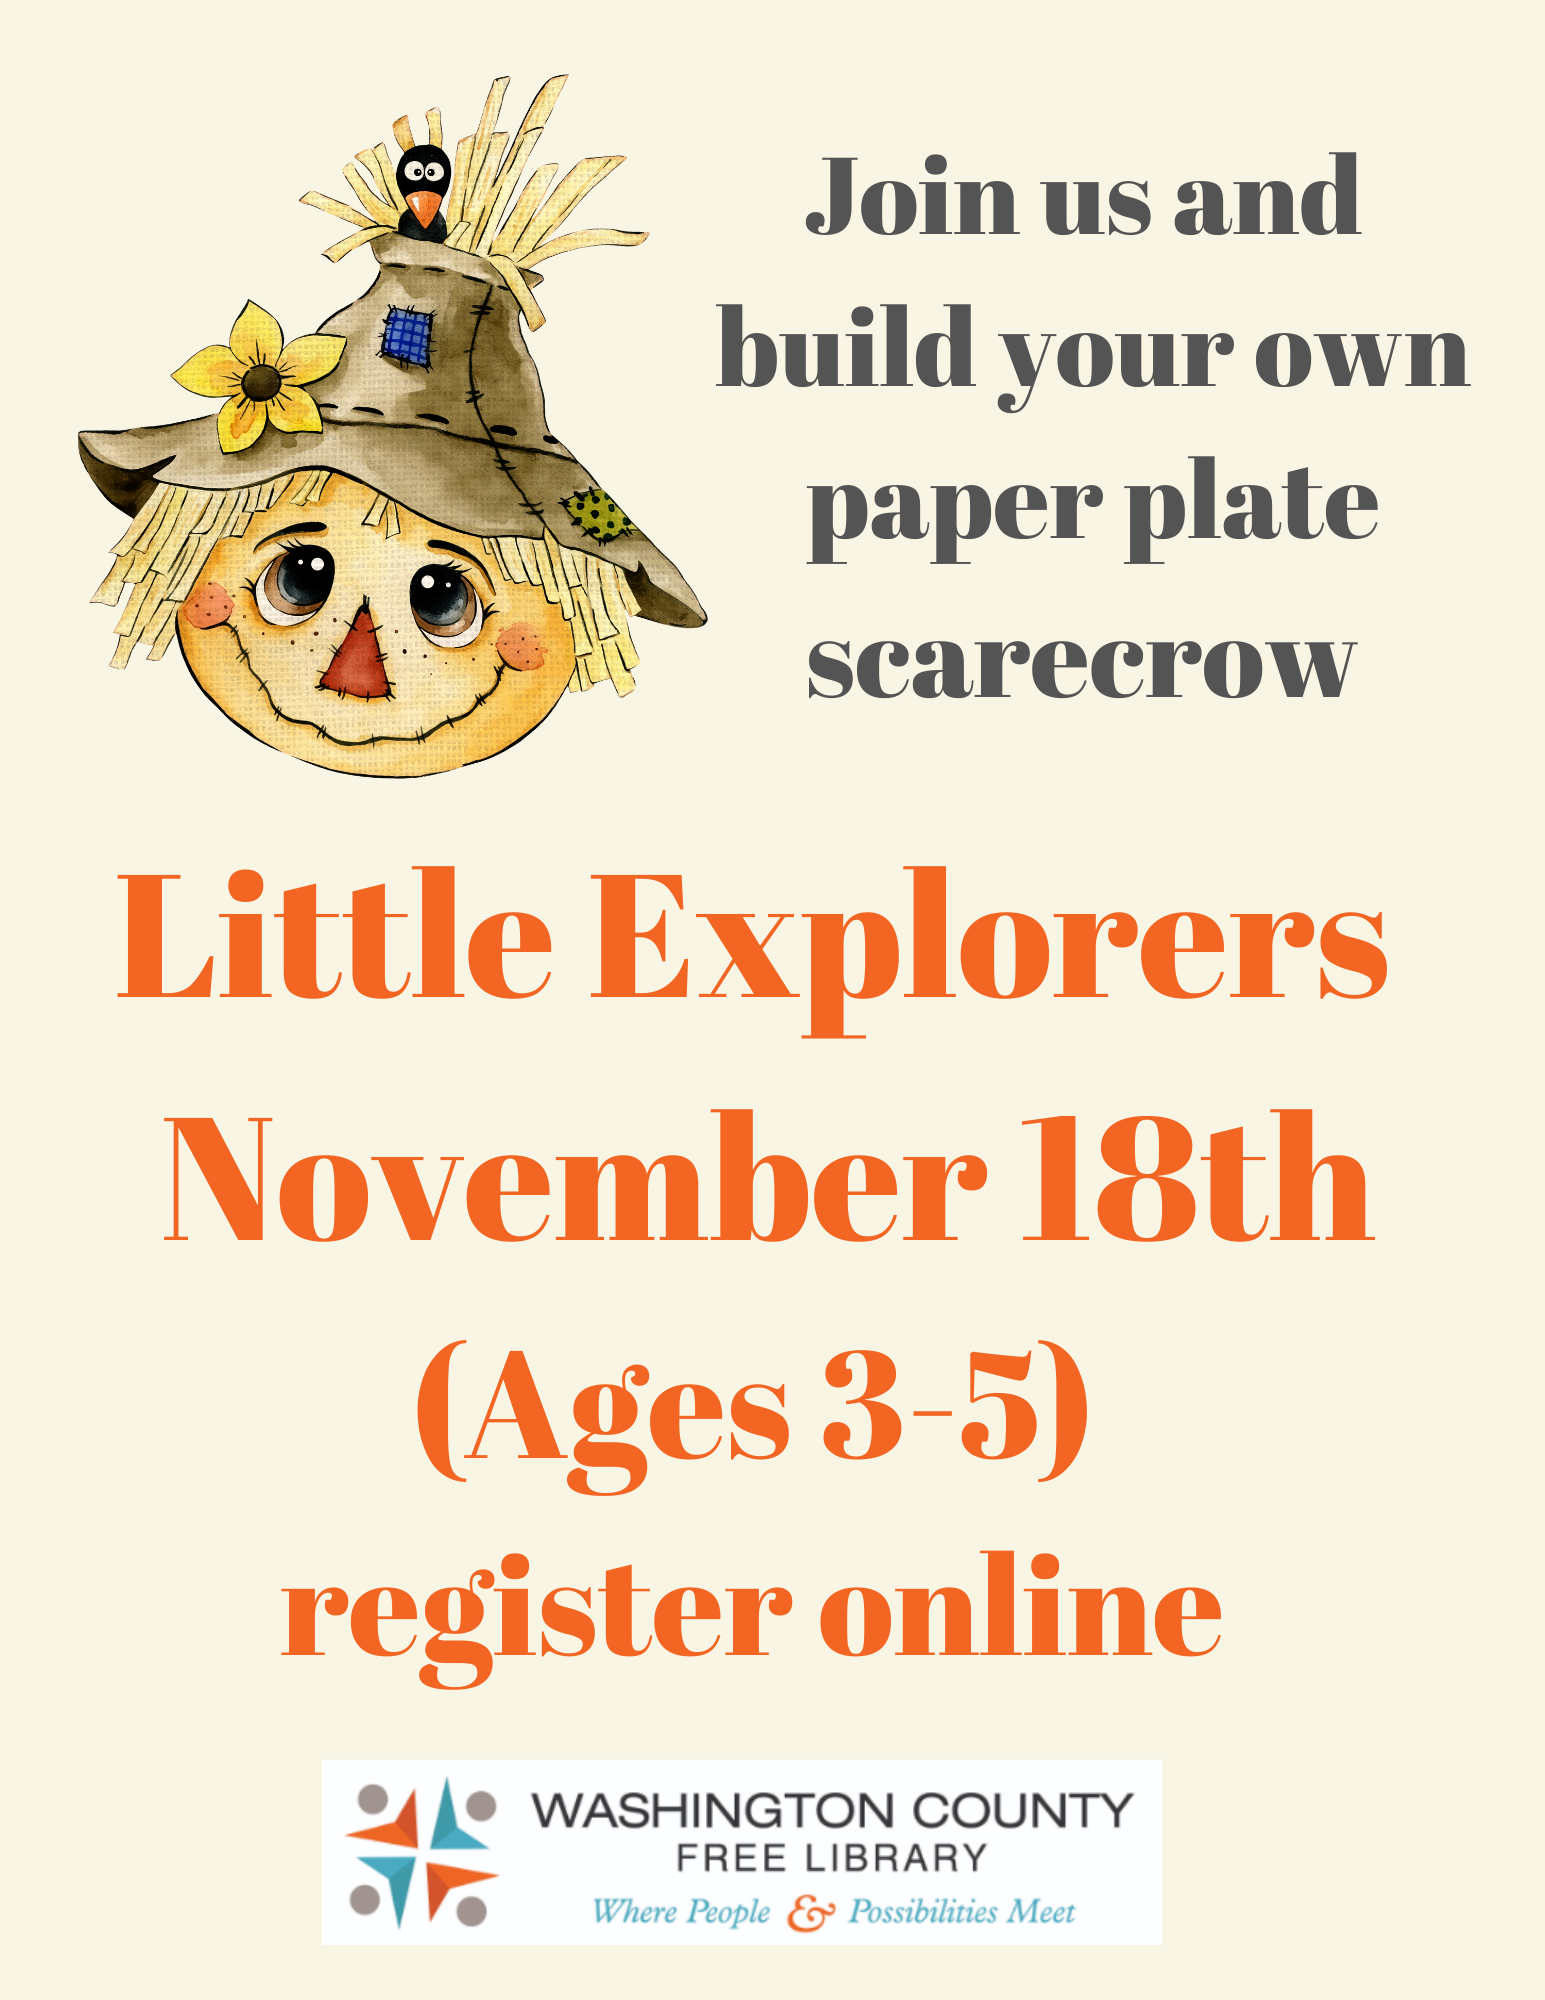 Little Explorers: Scarecrow Paper Plate creations